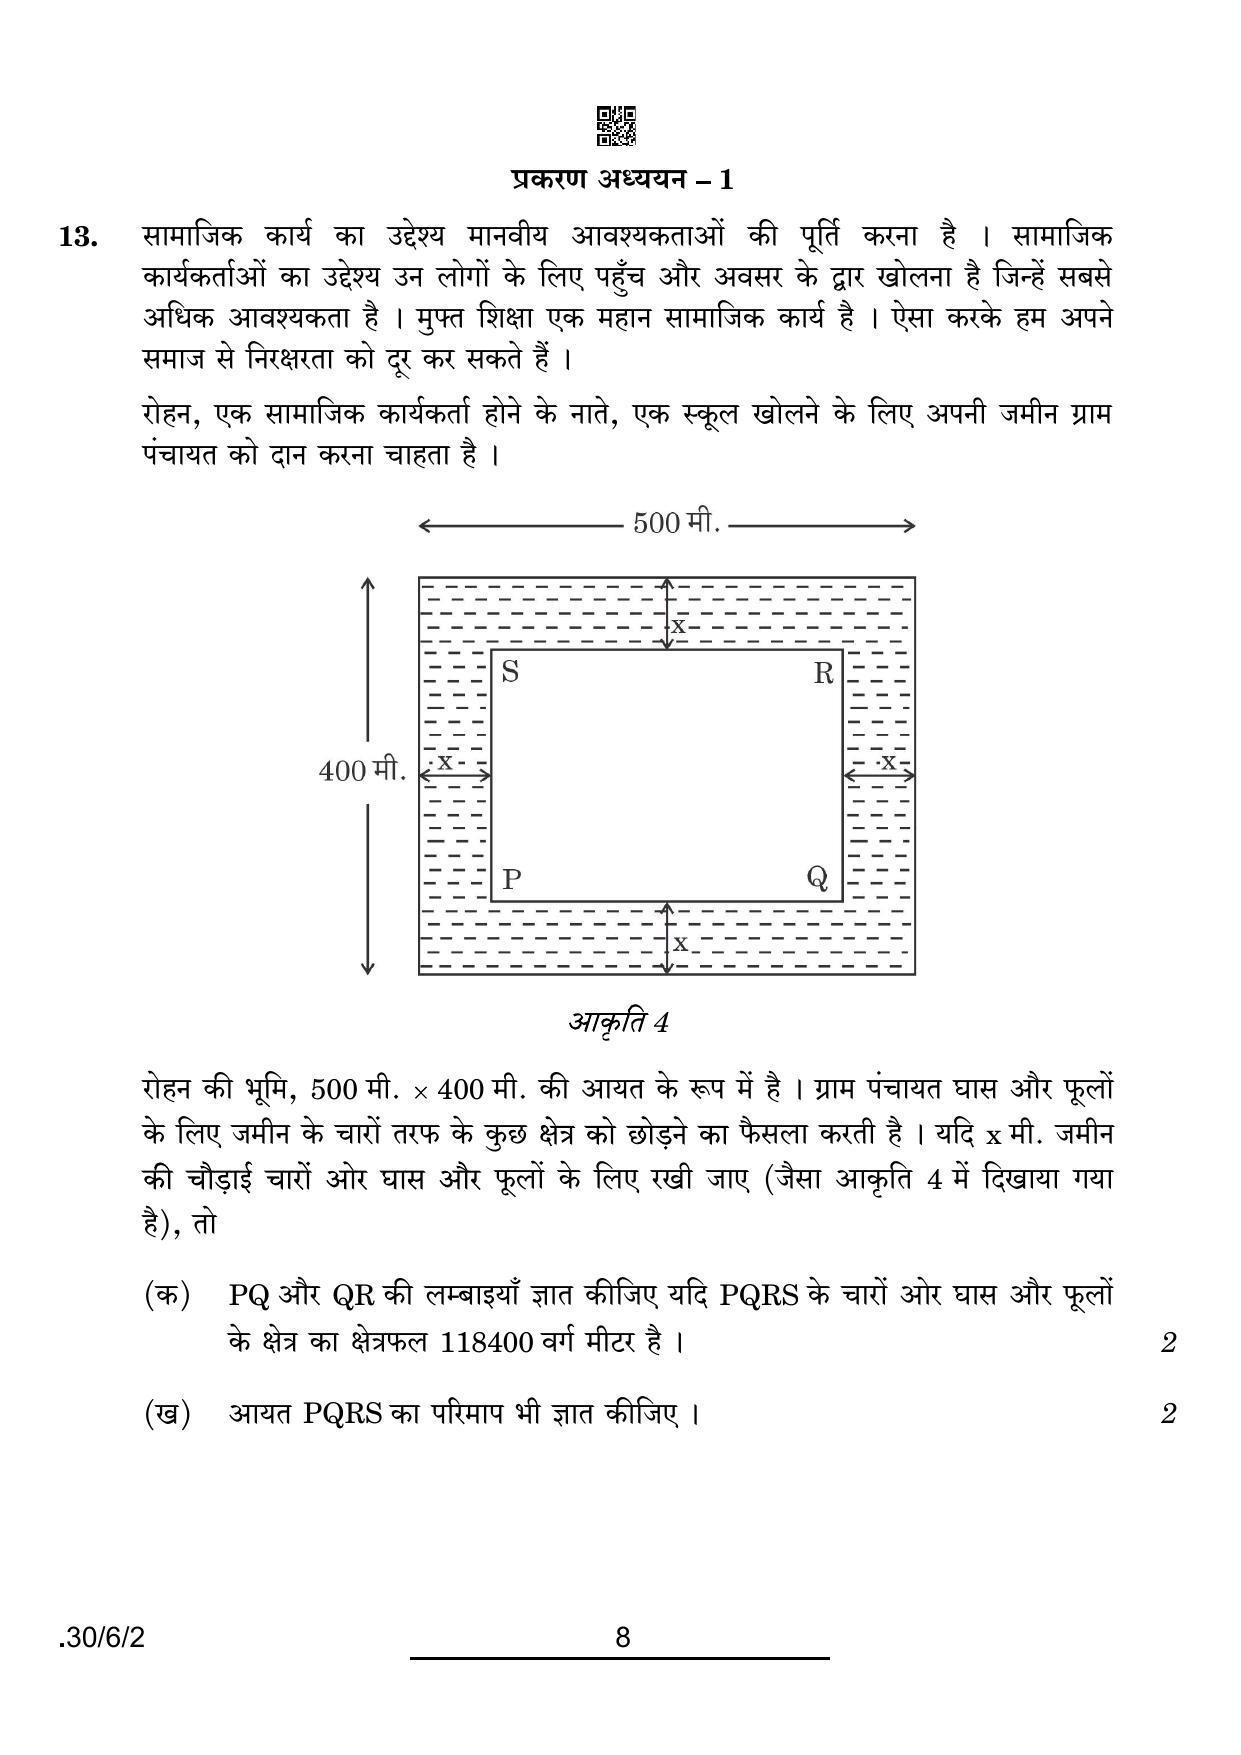 CBSE Class 10 30-6-2 Maths Std. 2022 Compartment Question Paper - Page 8